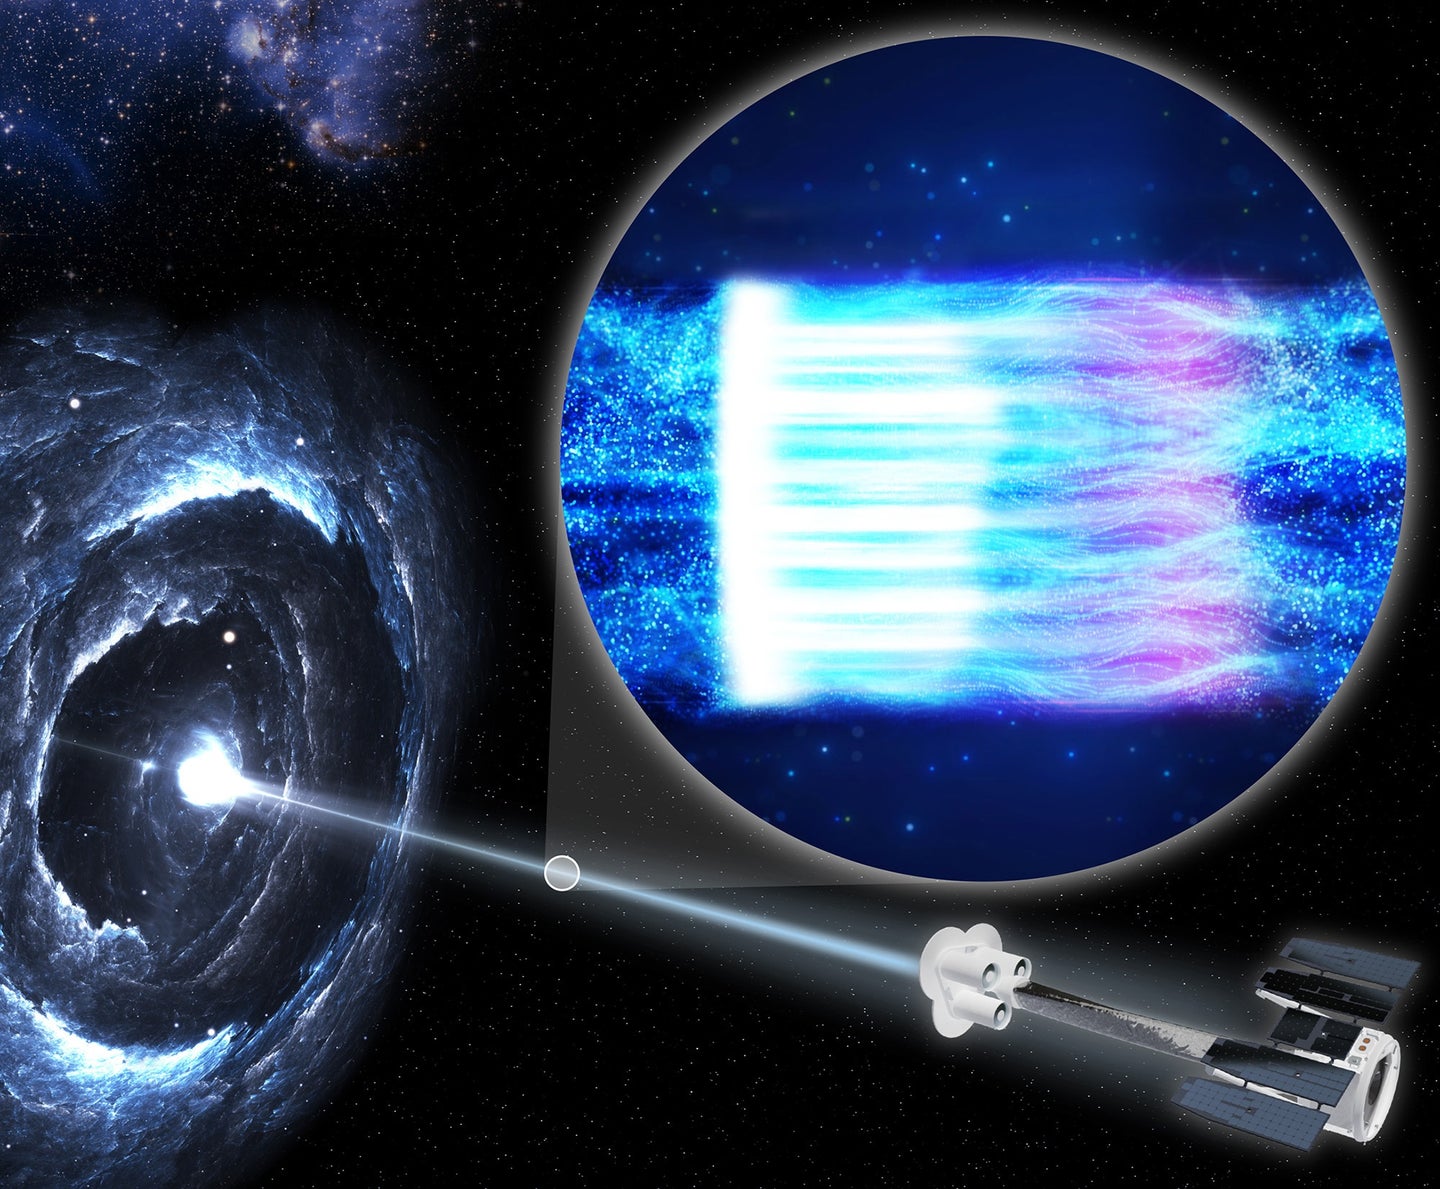 Black hole shooting beam of energy out speed of light and being caught by a space telescope in an illustration. There's an inset showing blue and purple electromagnetic waves,